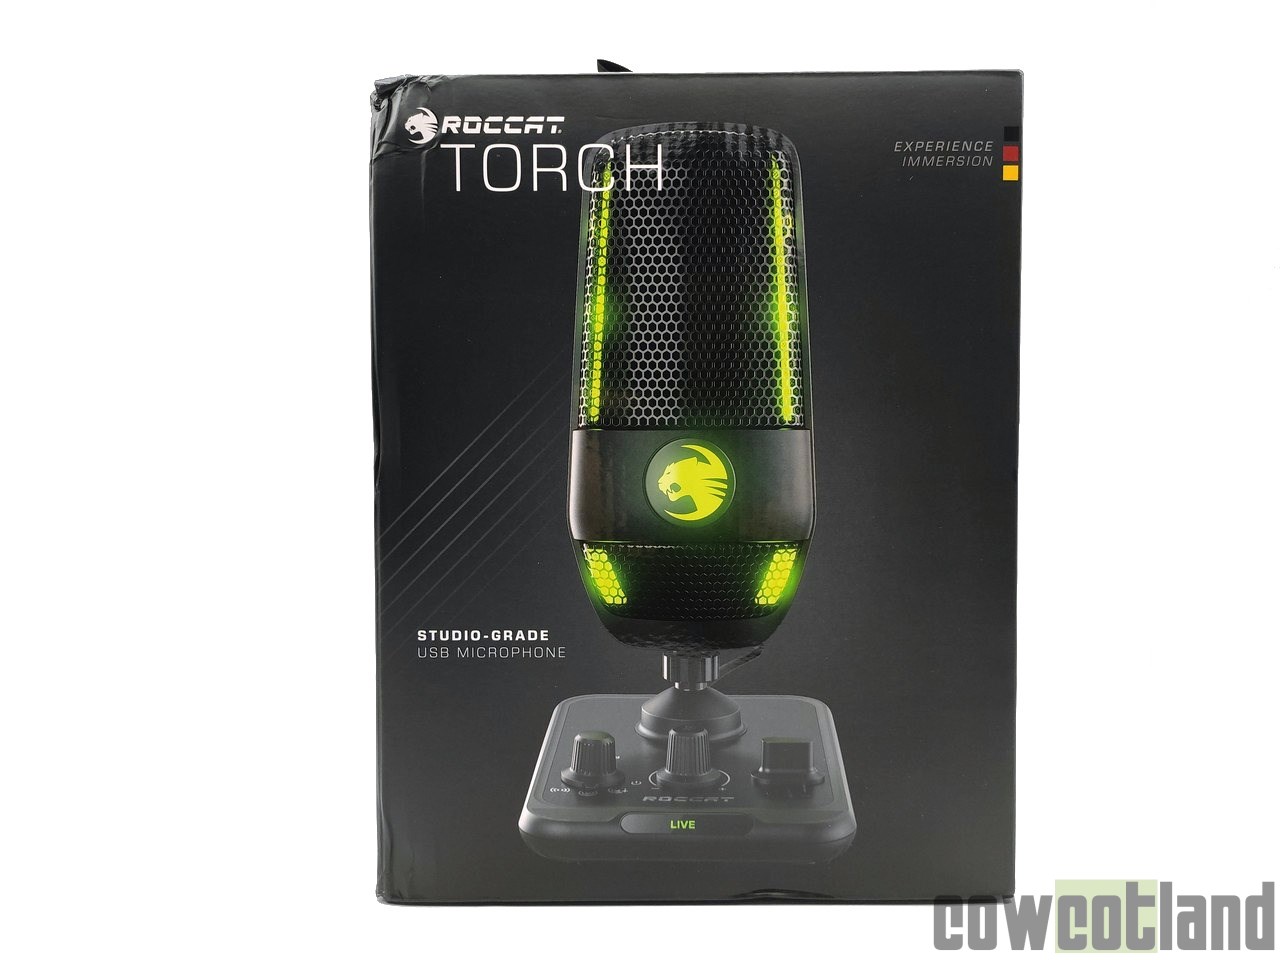 Image 45872, galerie Test micro ROCCAT Torch : ROCCAT se lance dans le micro gaming et streaming 